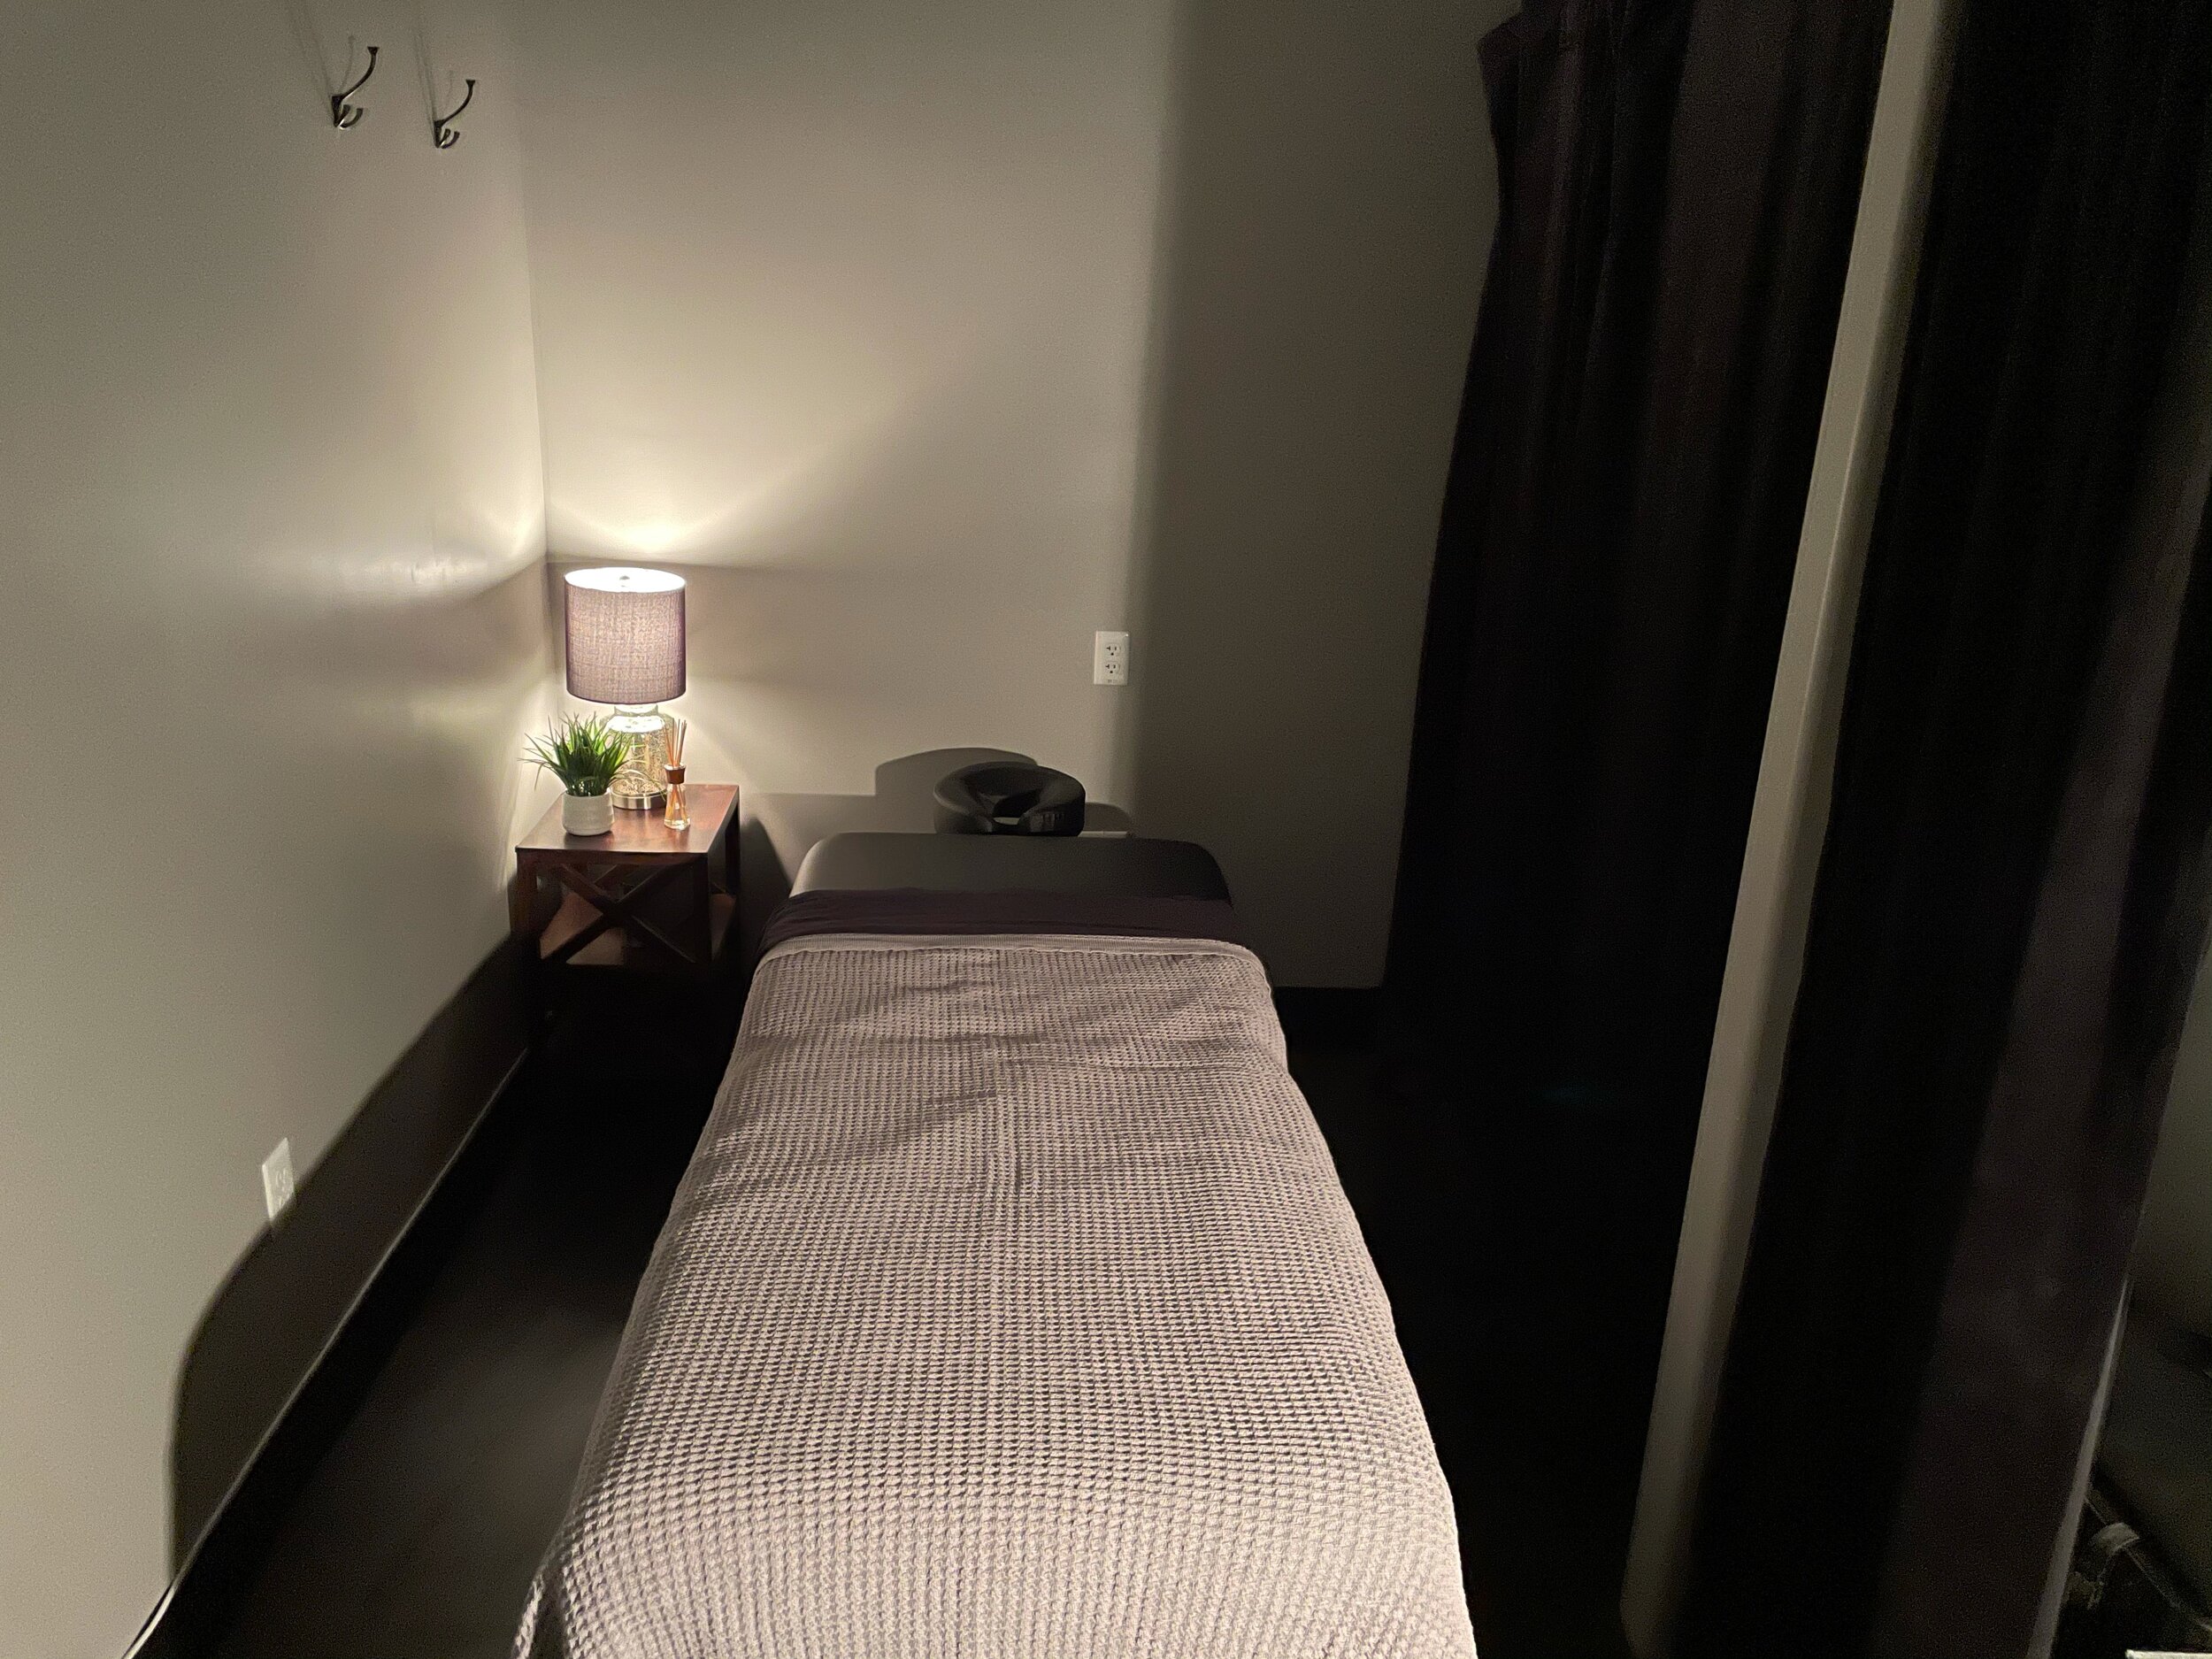 Dry Needling & Electronic muscle stimulation (EMS) - Bawn Holistic Therapies